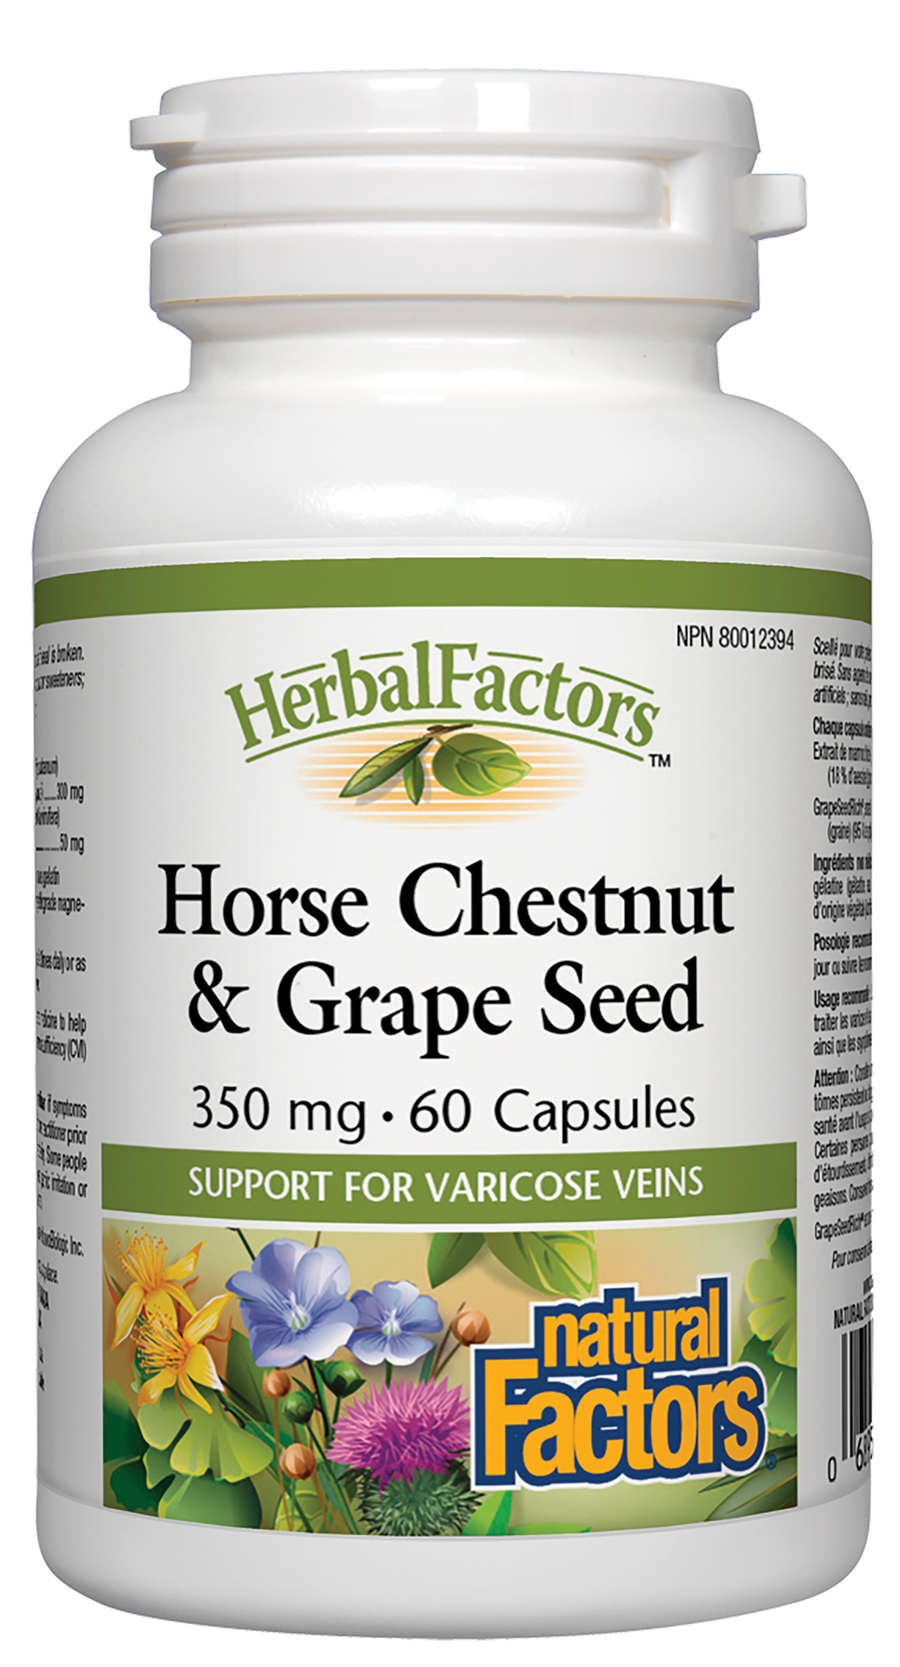 Natural Factors Horse Chestnut & Grape Seed 350mg 60 Capsules